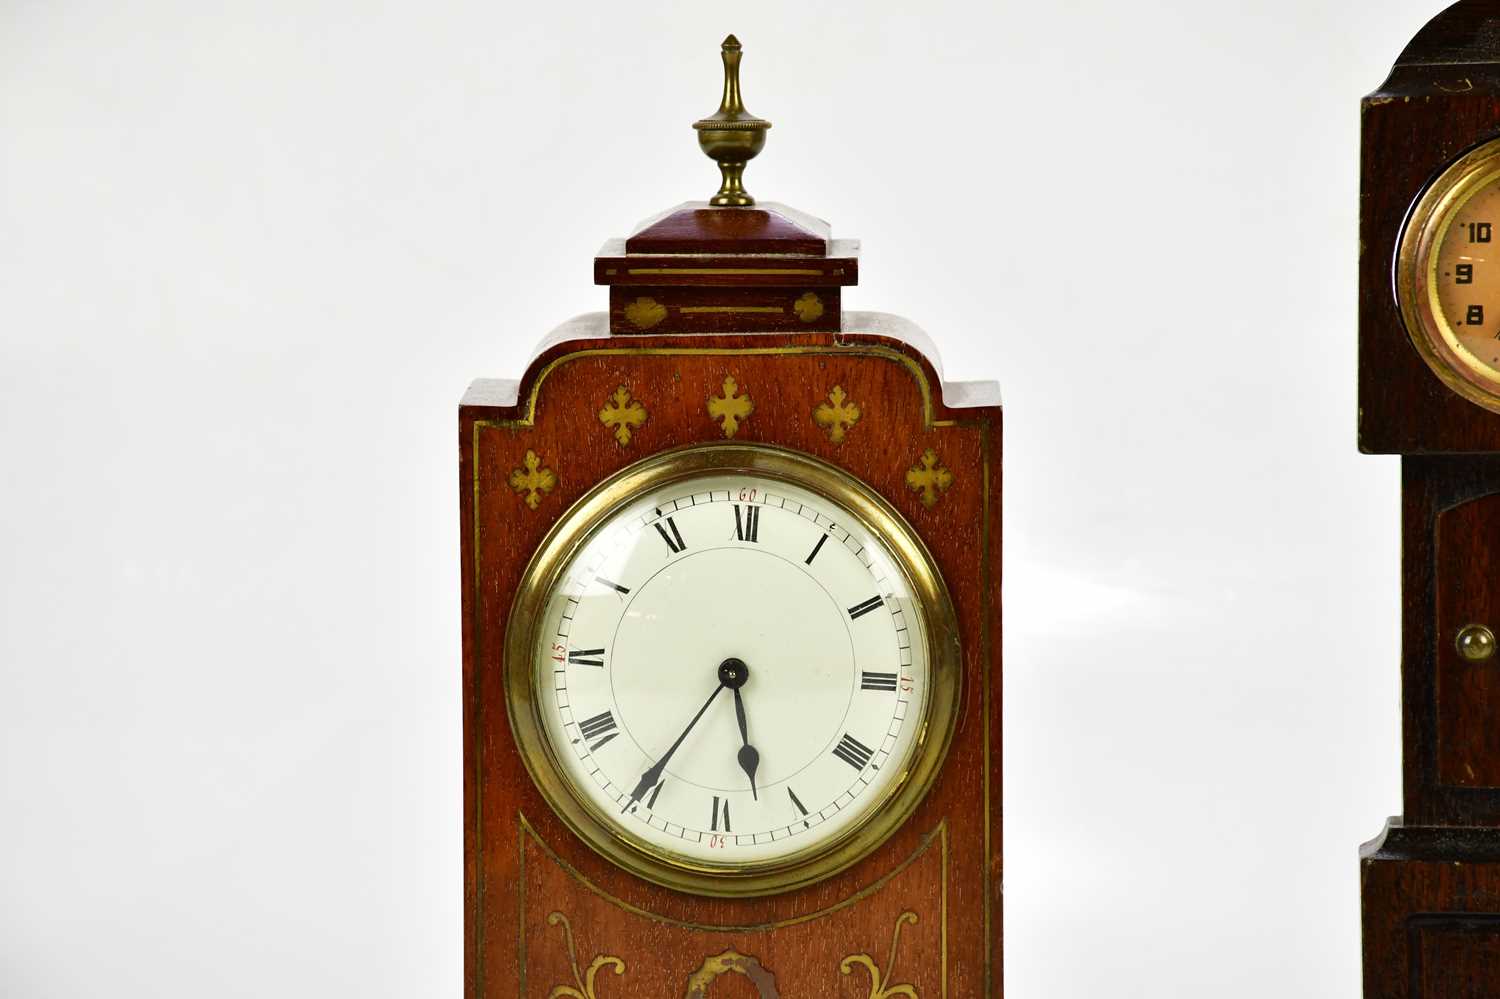 A late 19th century brass inlaid mahogany mantel clock, with brass urn finial above the enamel - Image 2 of 4